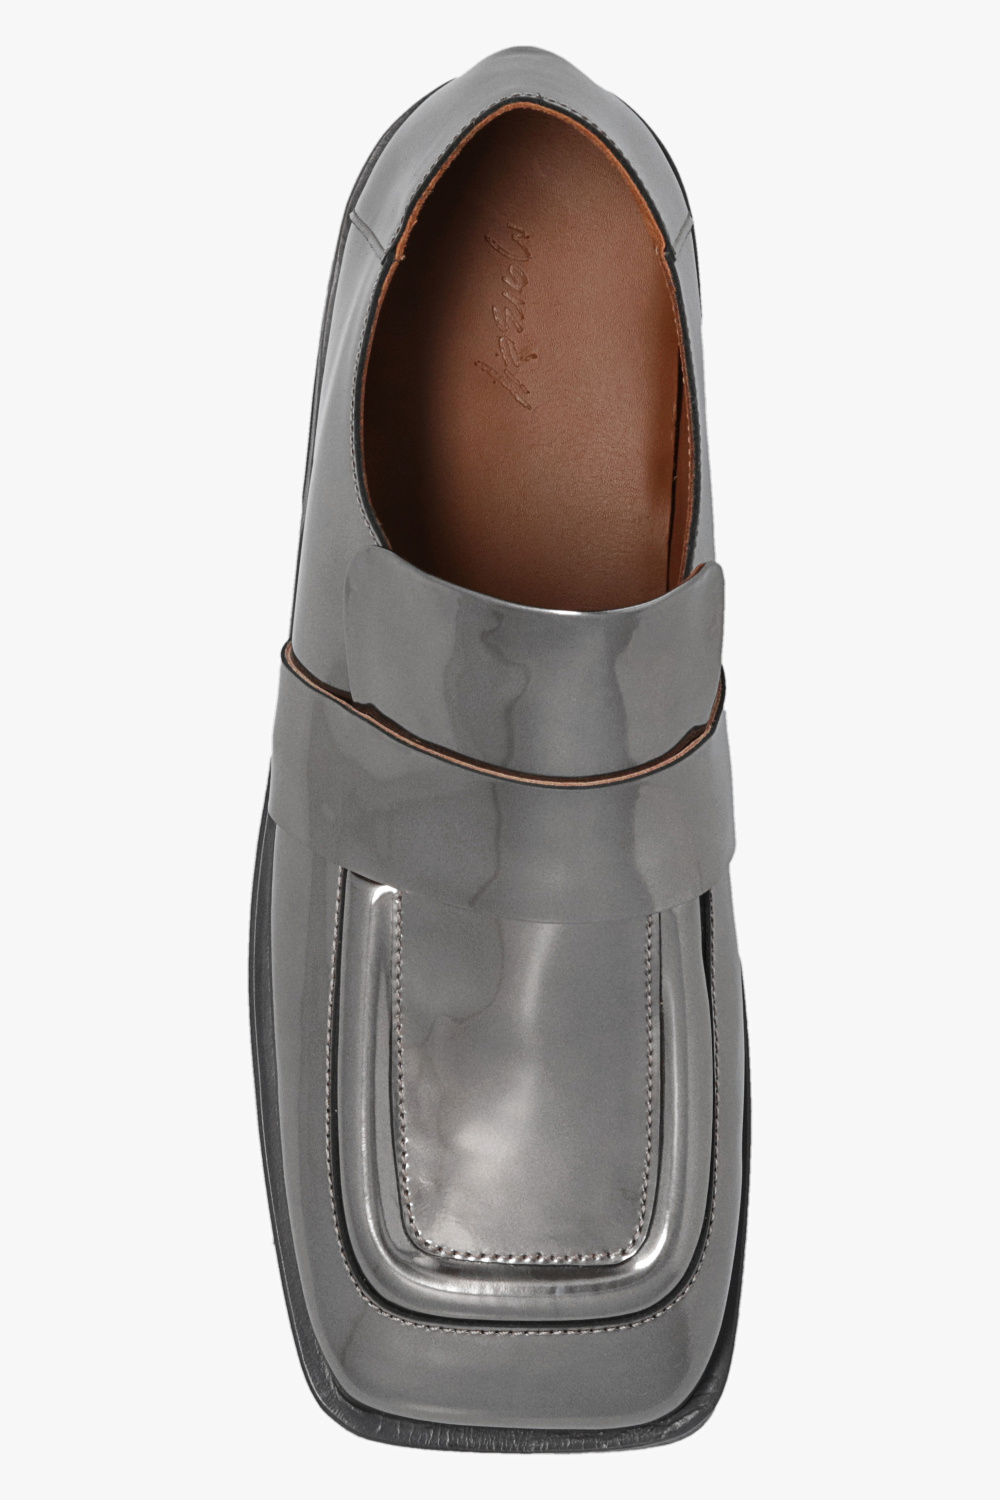 Marsell ‘Spatolo’ leather loafers